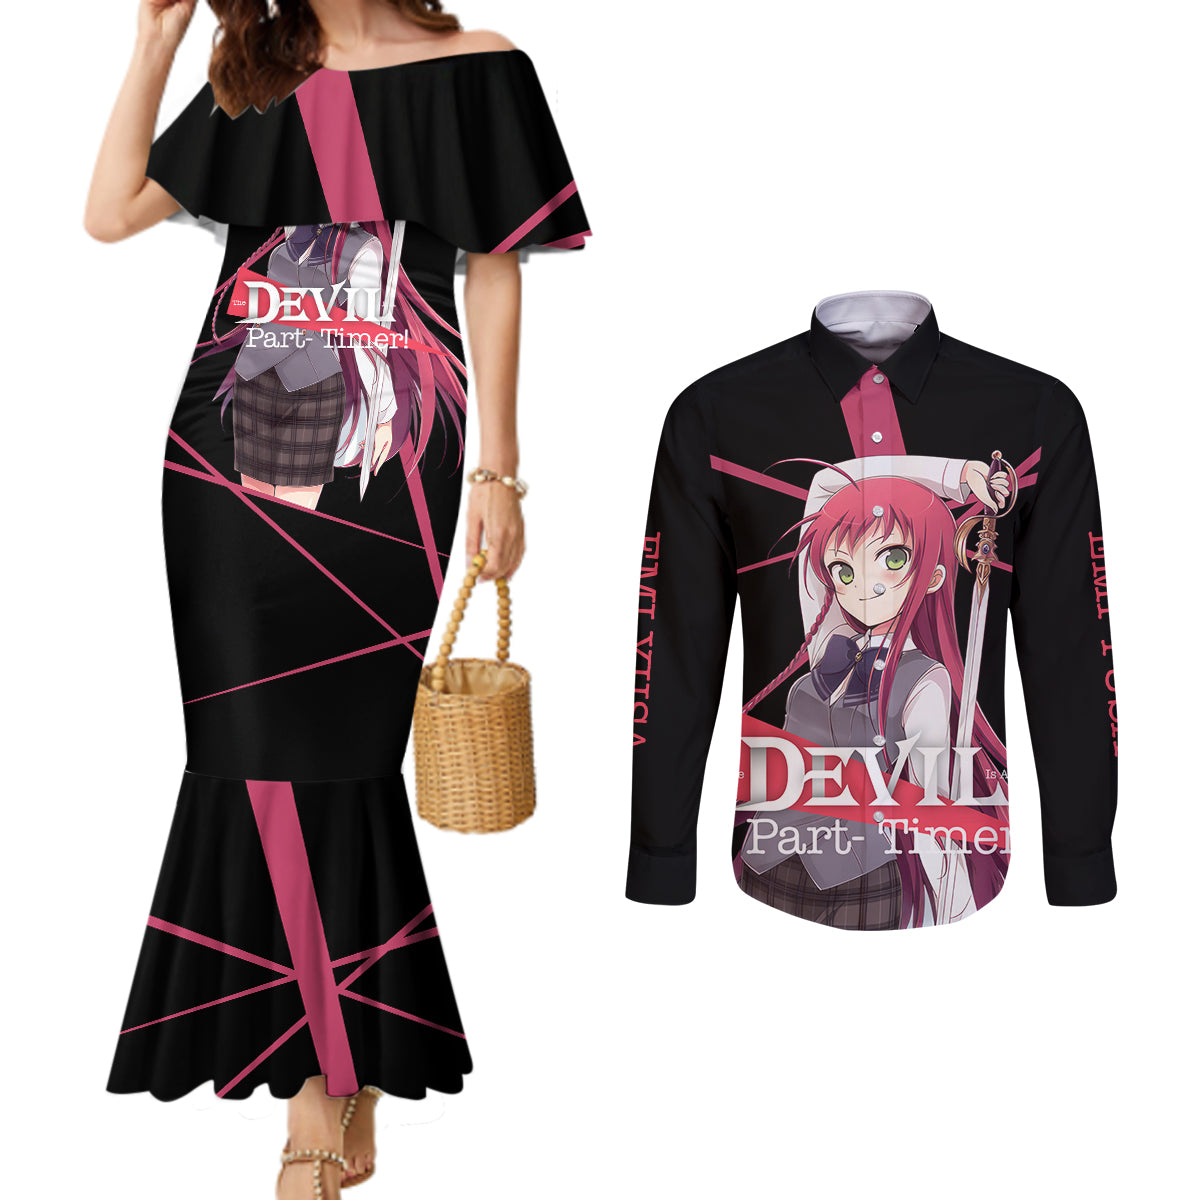 Emi Yusa The Devil Part Timer Couples Matching Mermaid Dress and Long Sleeve Button Shirt Anime Style